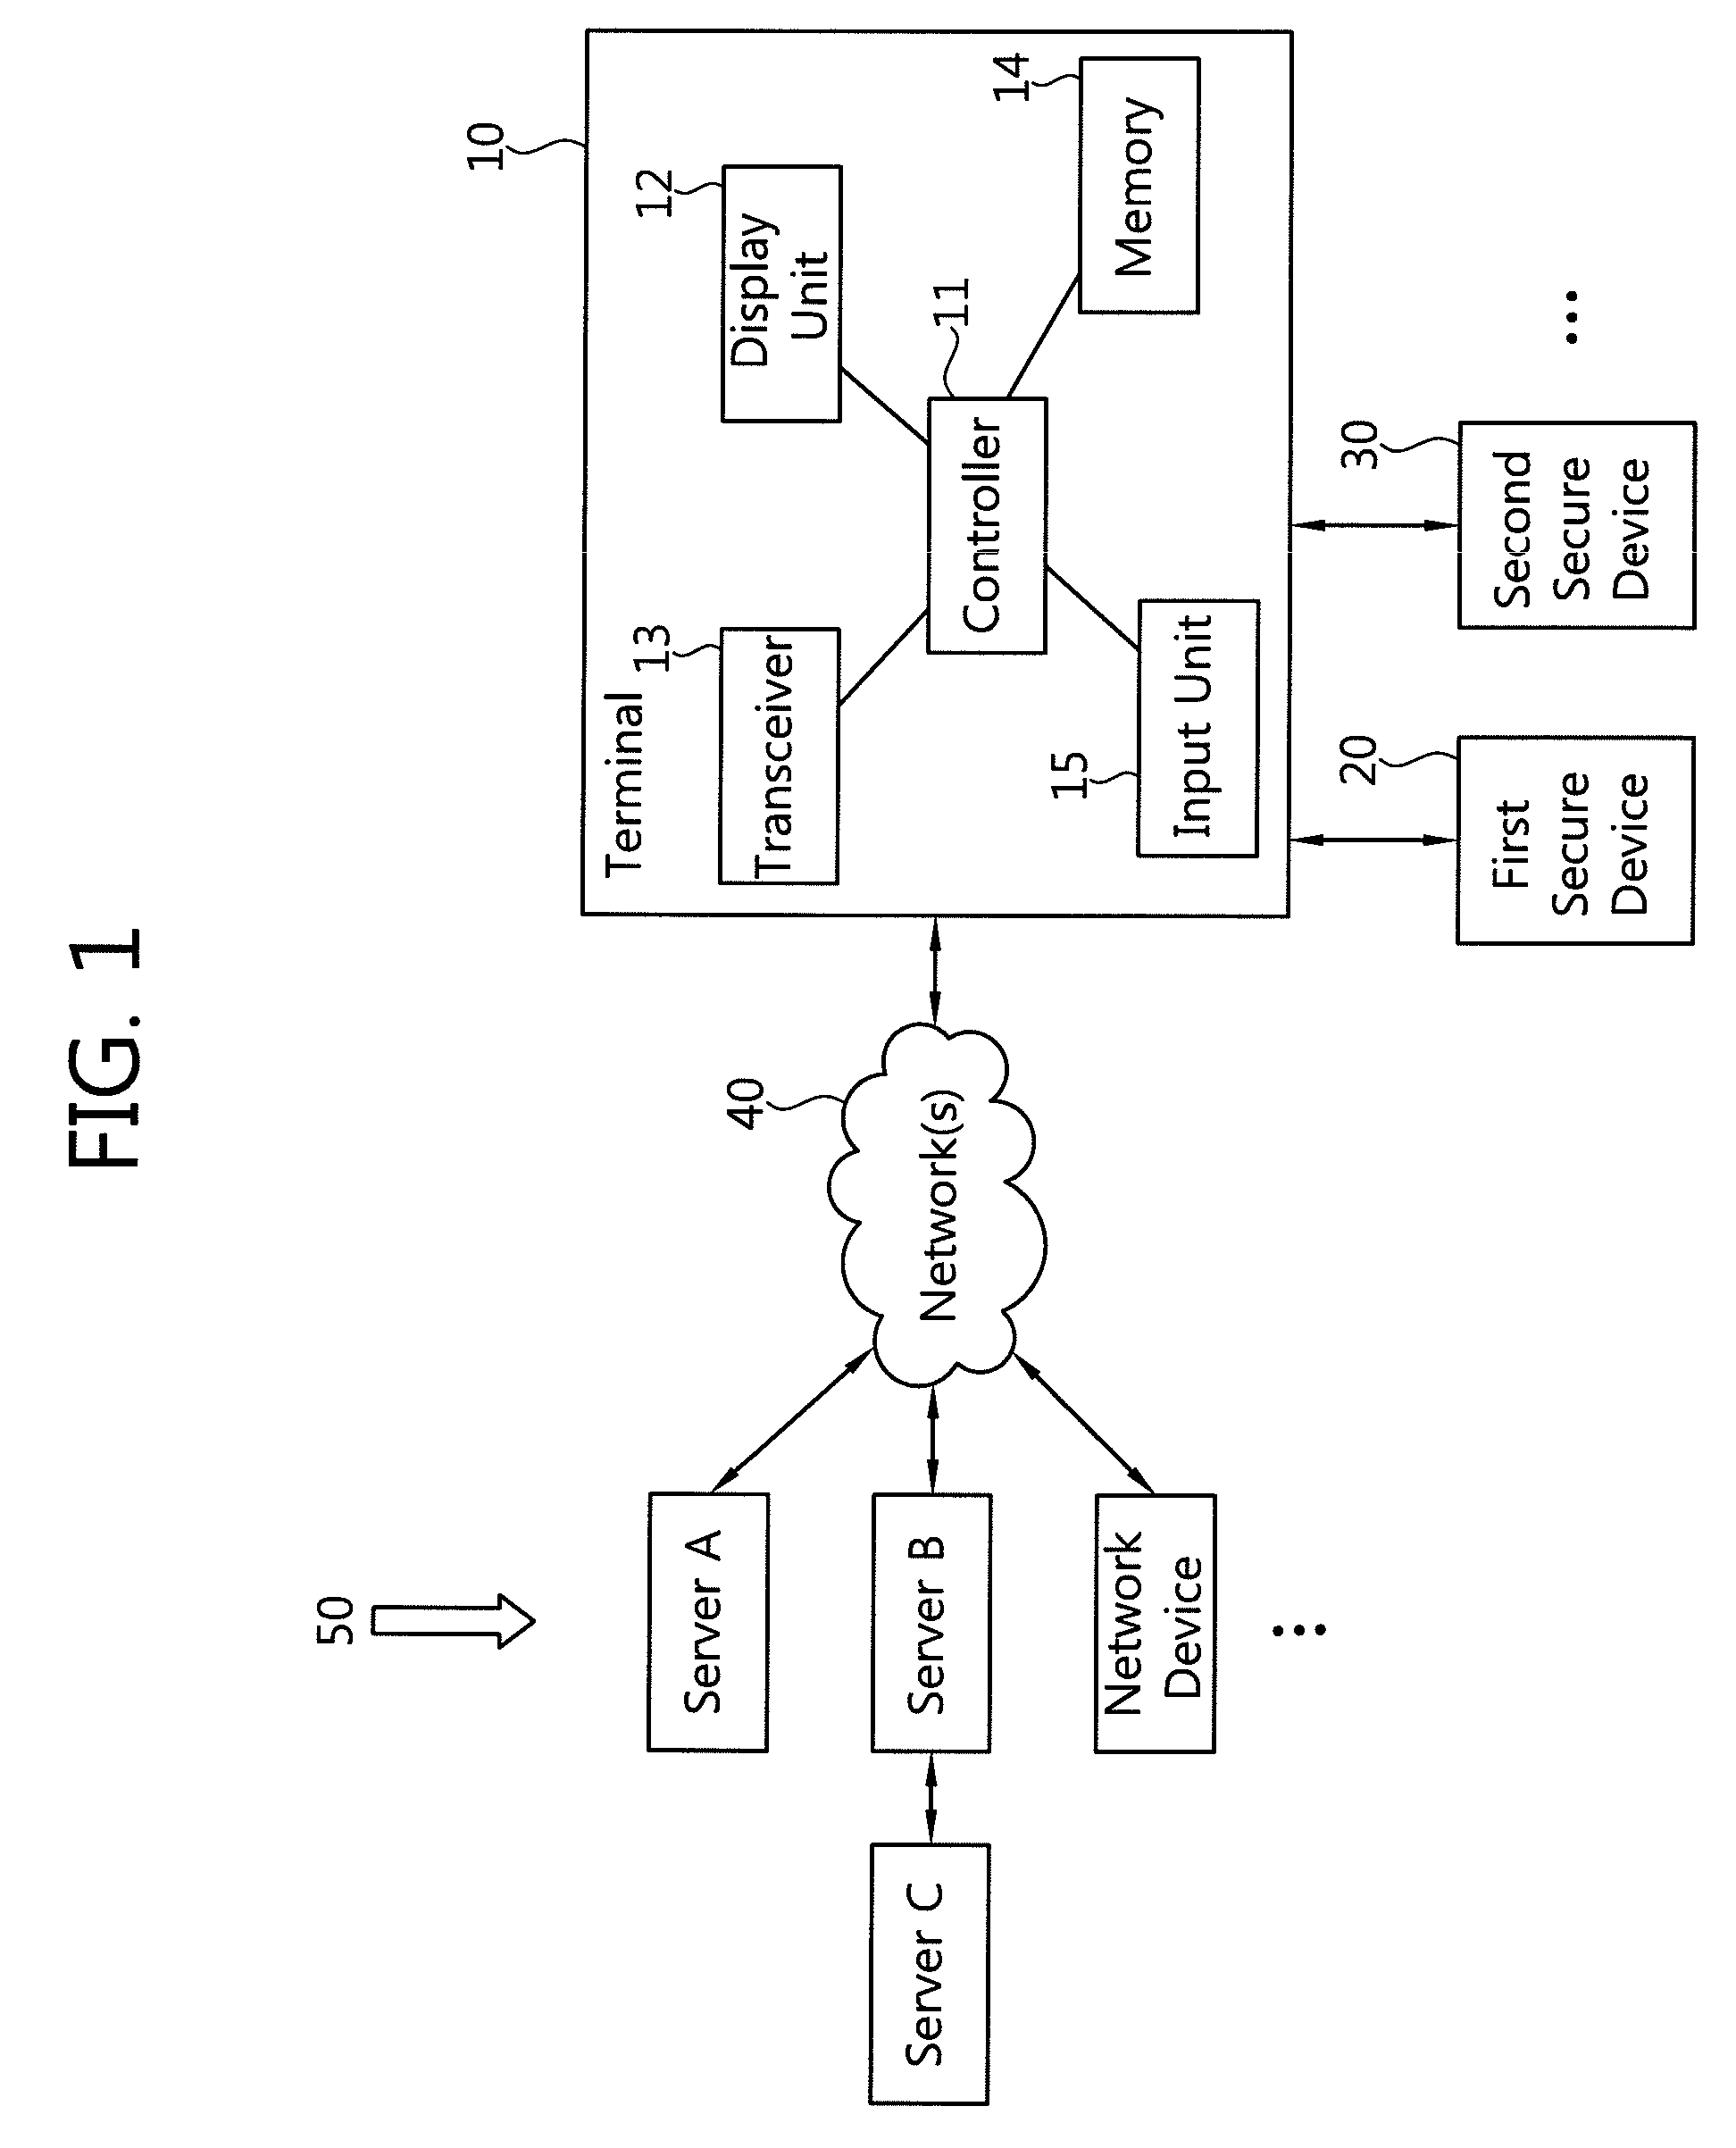 Terminal and method for selecting secure device